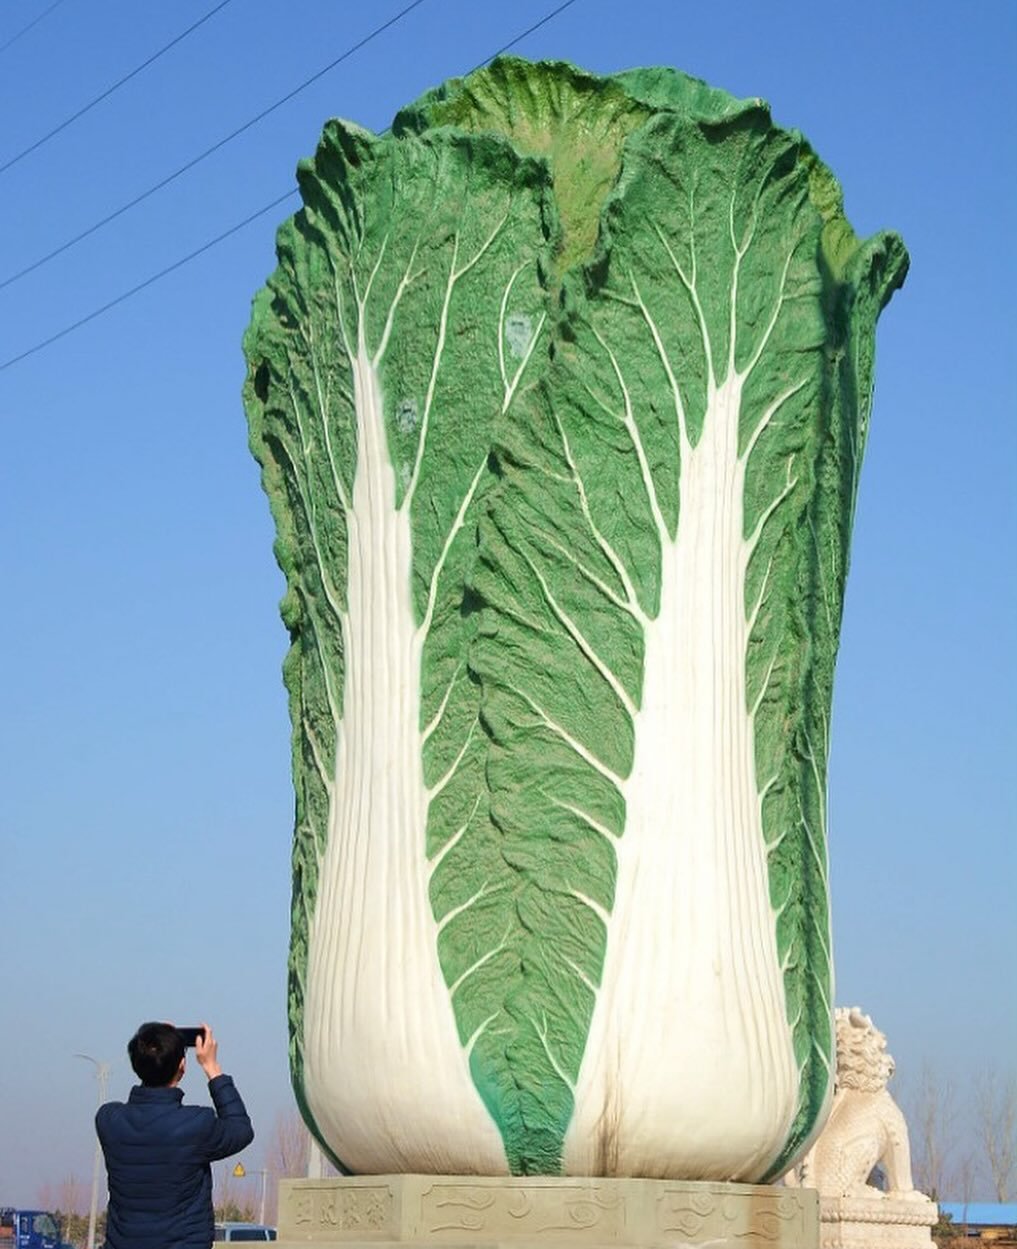 Glass cabbage sculpture in Liaocheng, China 🥬 Cabbage is a symbol of wealth and prosperity in Chinese culture. 

Via @all___kinds